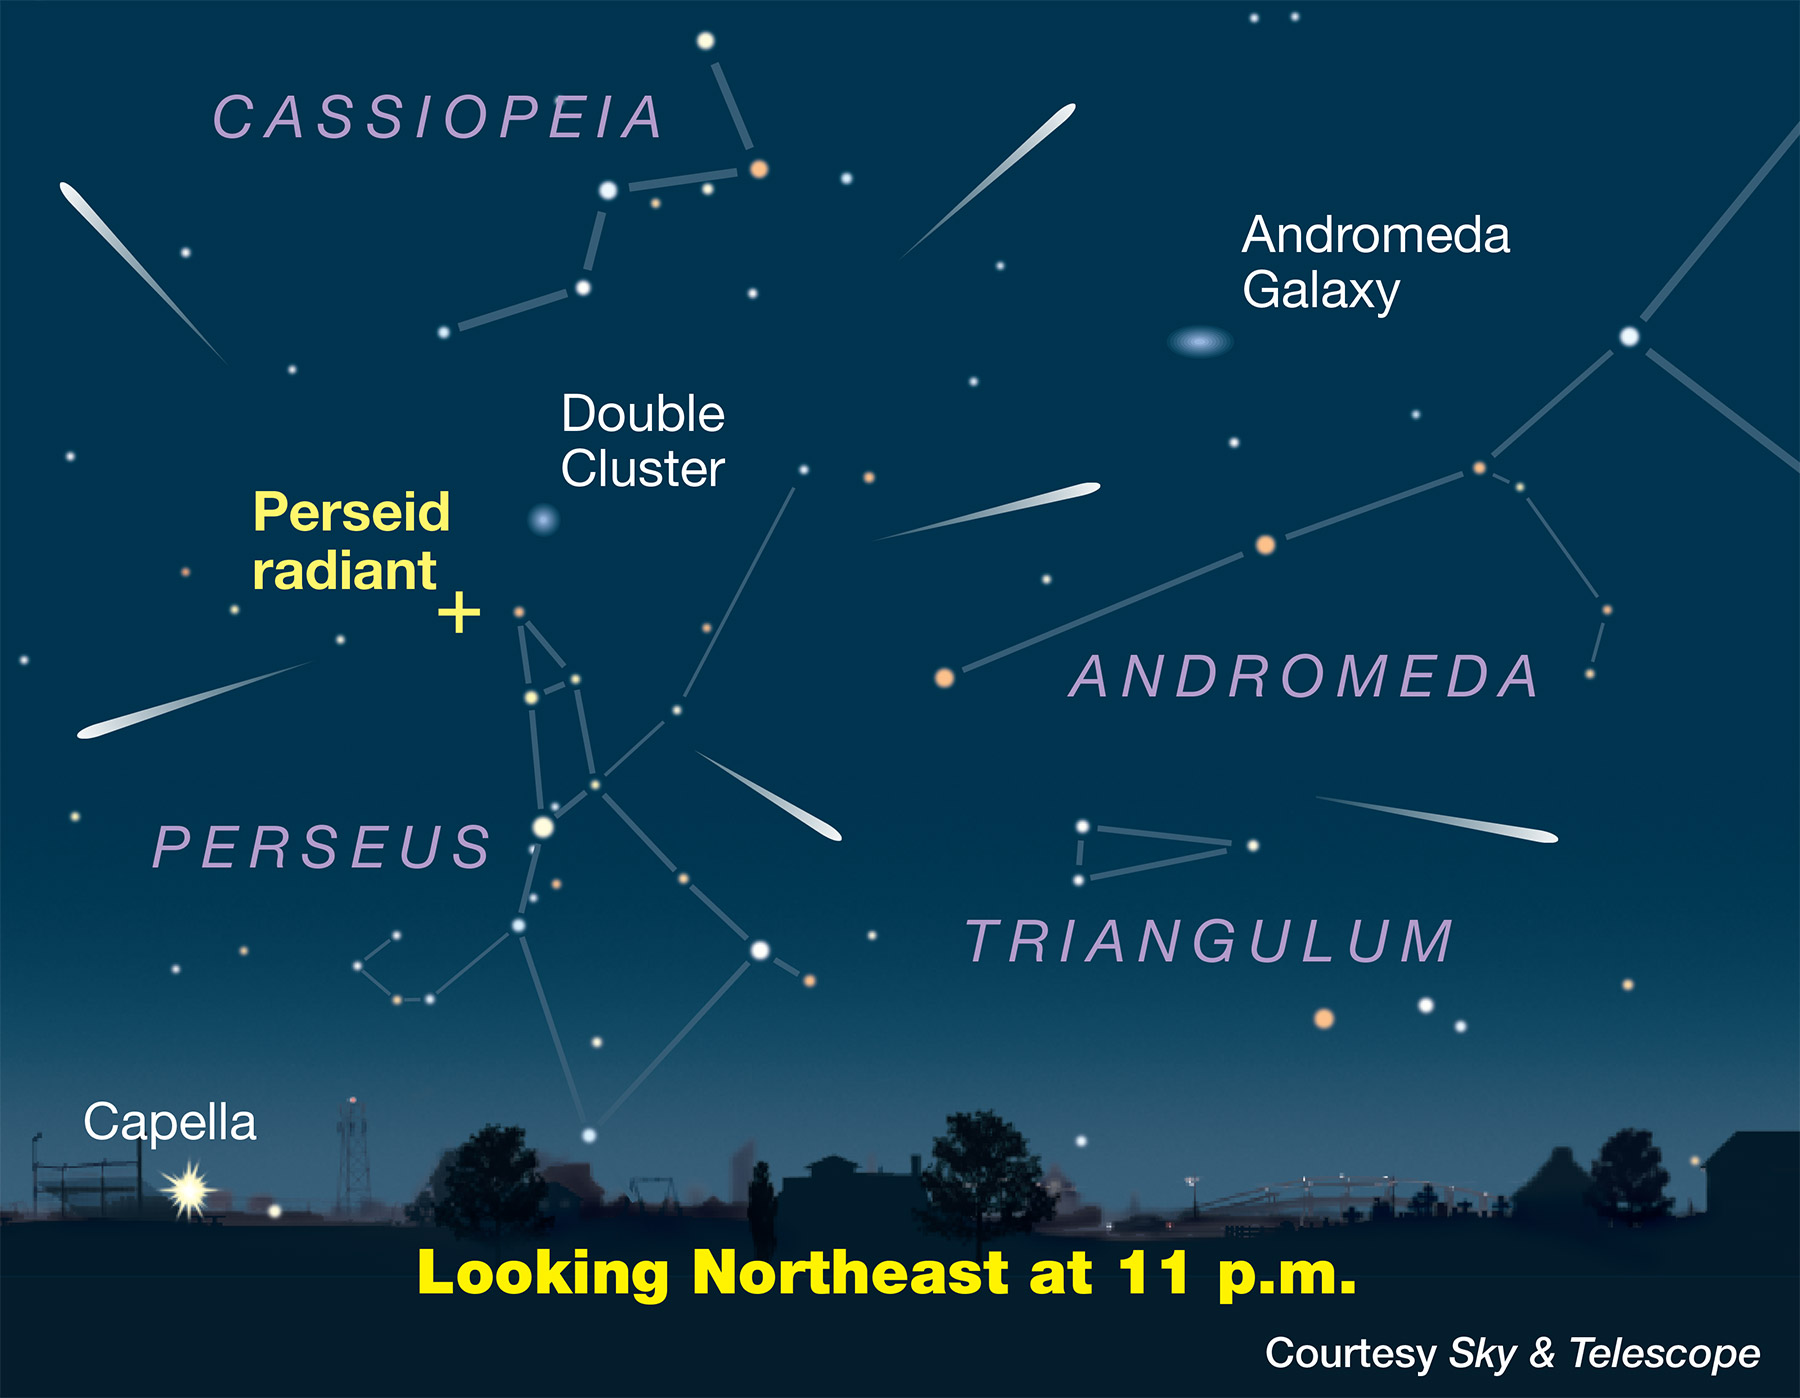 Here's the US weather forecast for the Perseid meteor shower's peak